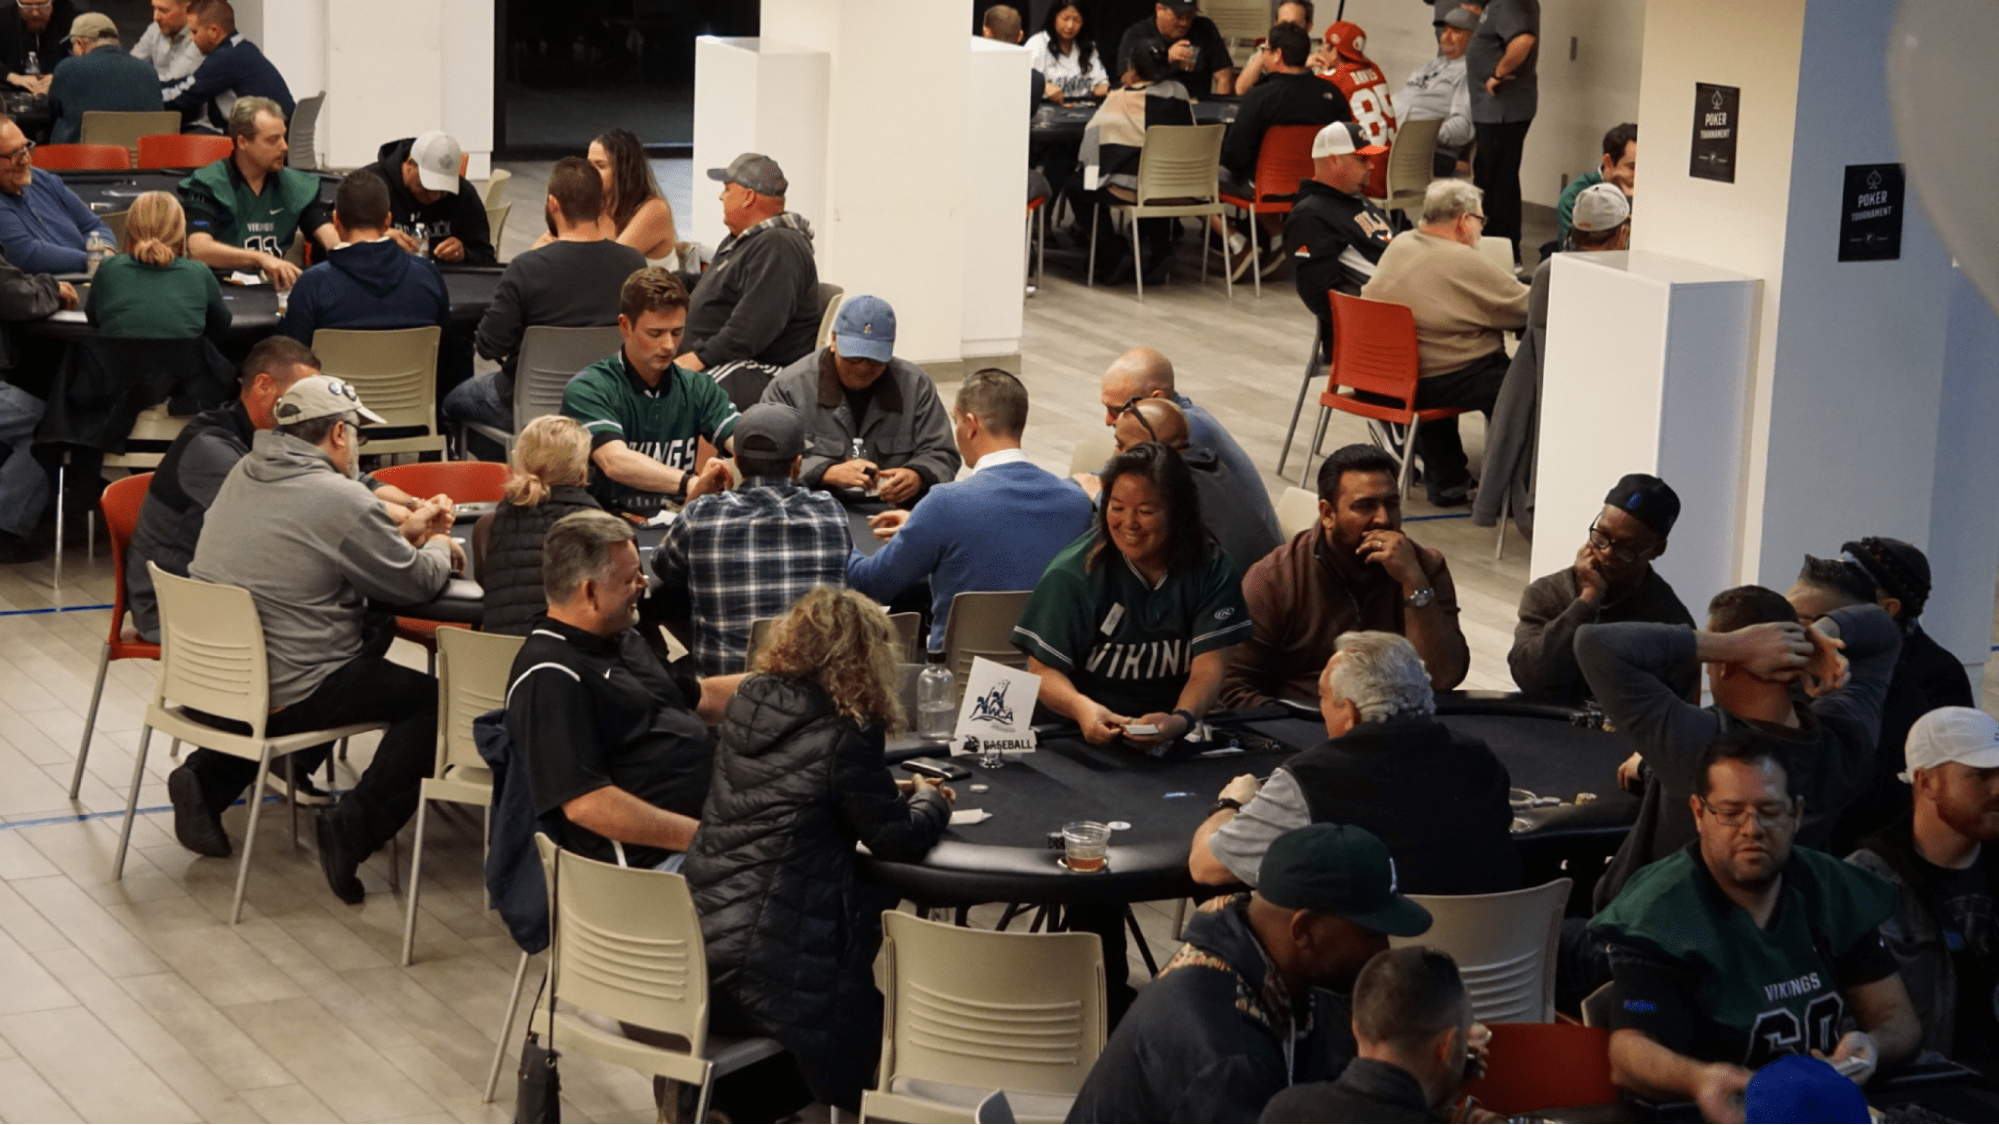 People playing poker at an event